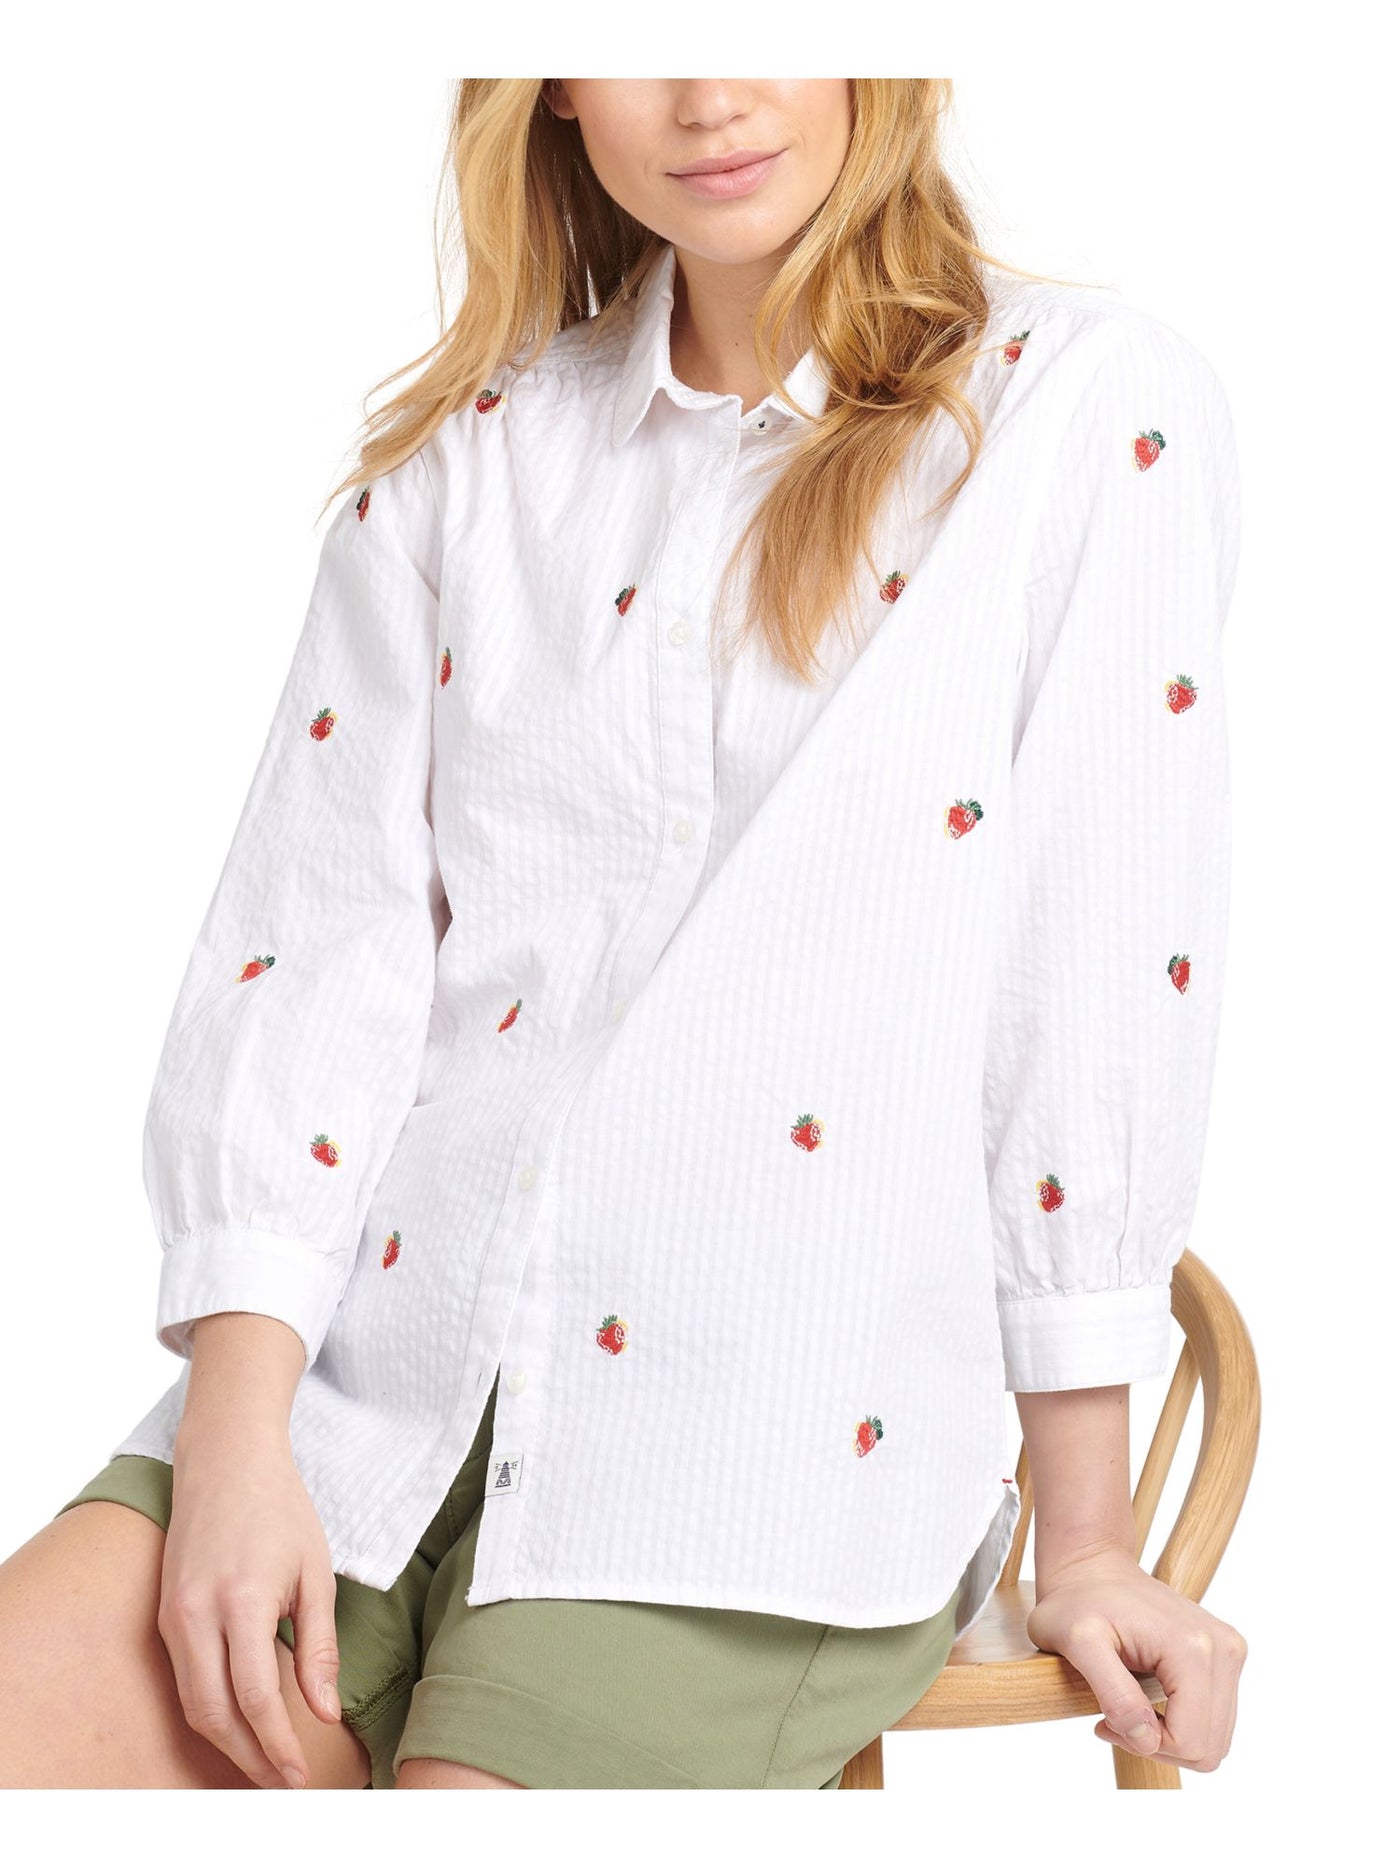 BARBOUR Womens White Textured Embroidered Cuffed Curved Hem Slitted Striped 3/4 Sleeve Collared Button Up Top 4